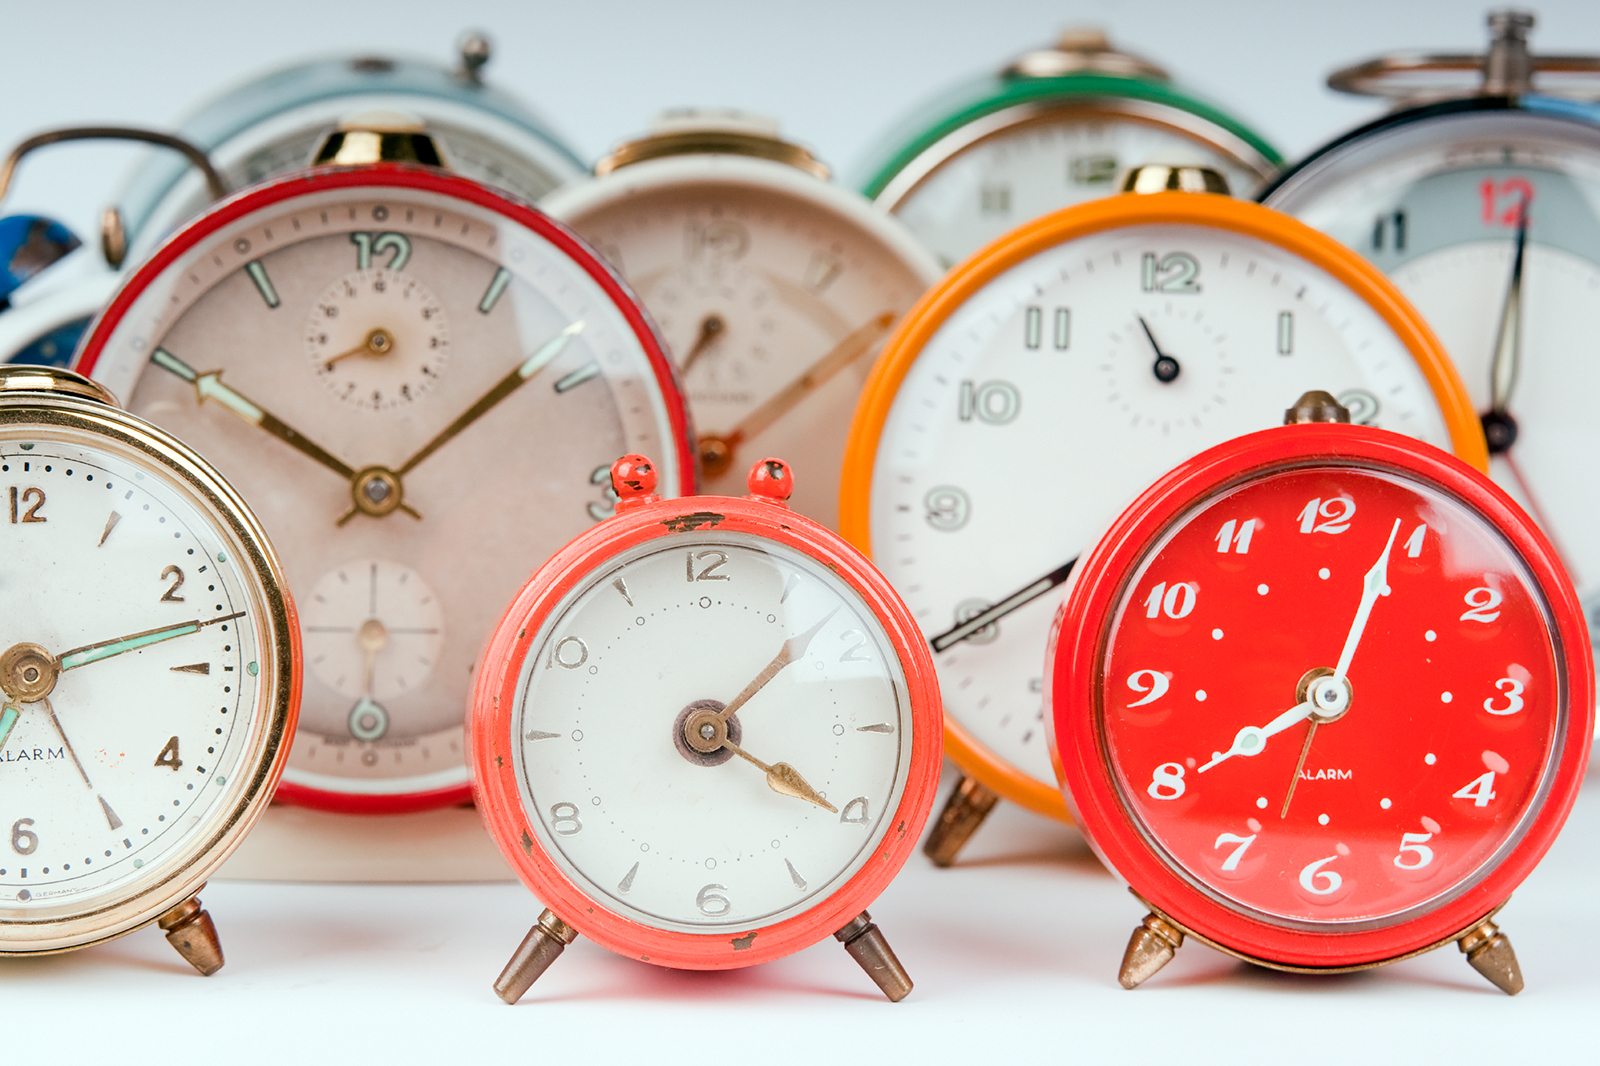 Effective Time Management: A Skill For A Productive Workplace